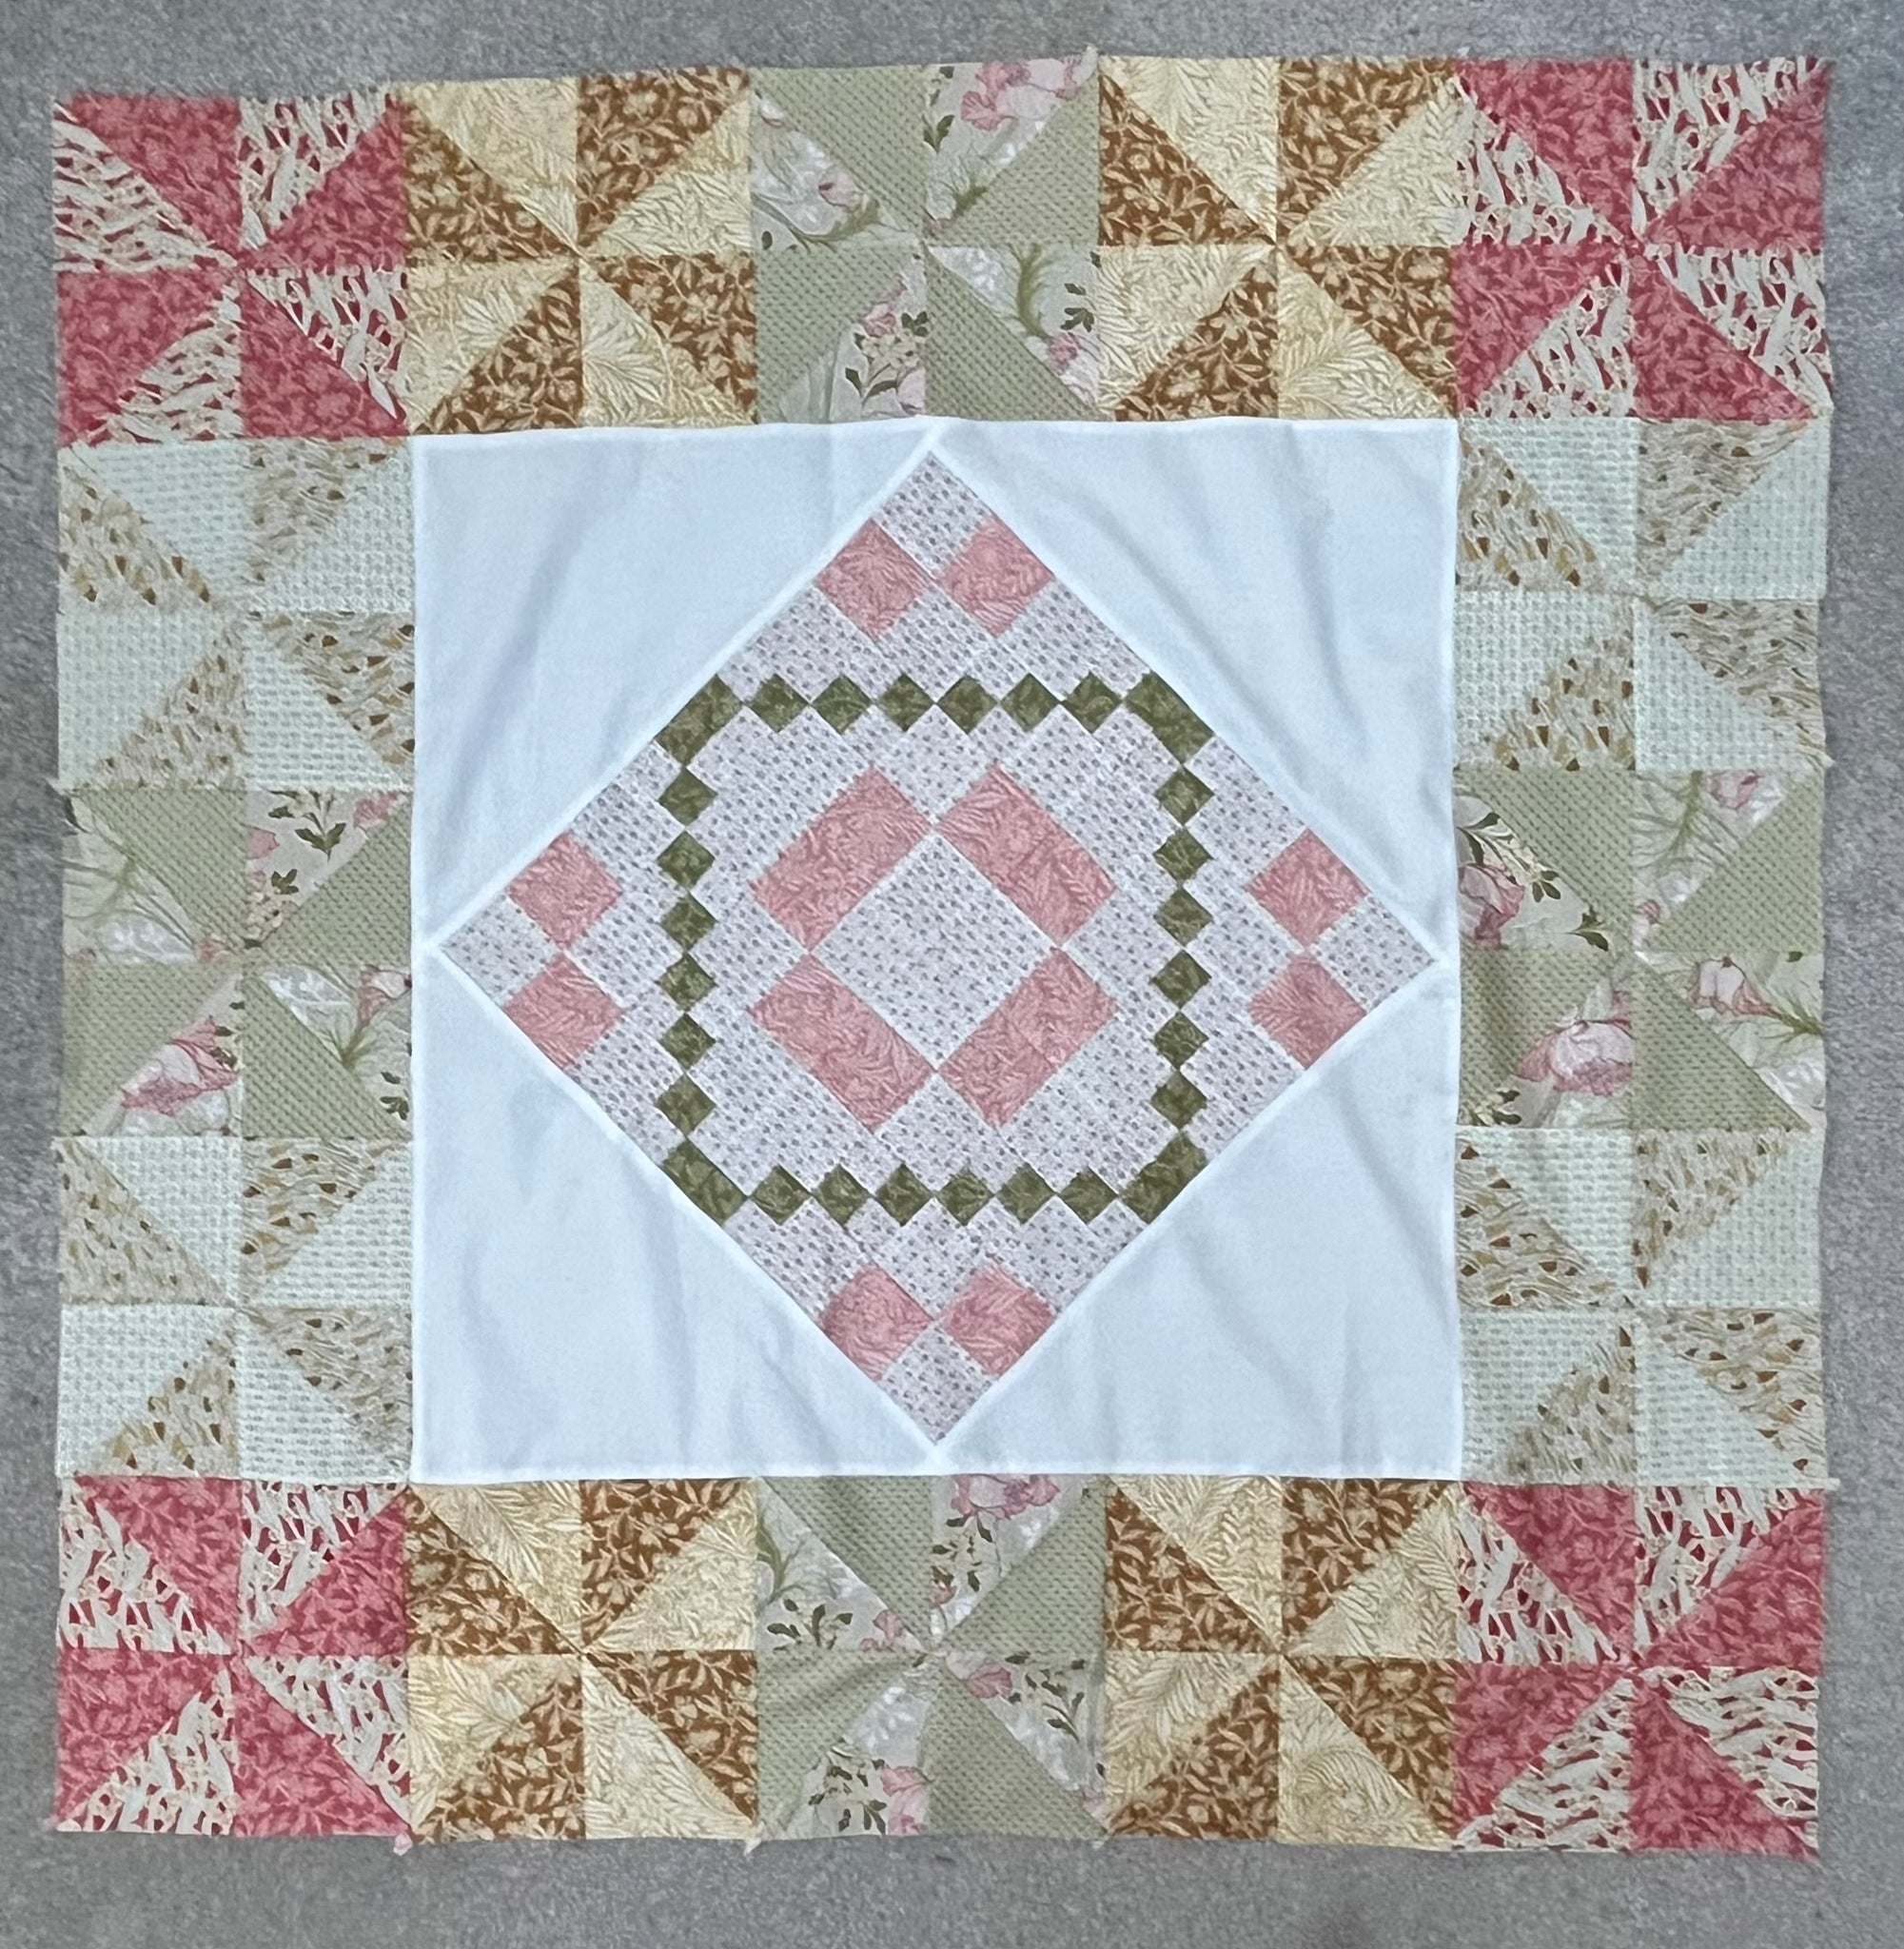 NEW Pinwheel Quilt  - Quilt Top Only - Just needs sandwiching and quilting